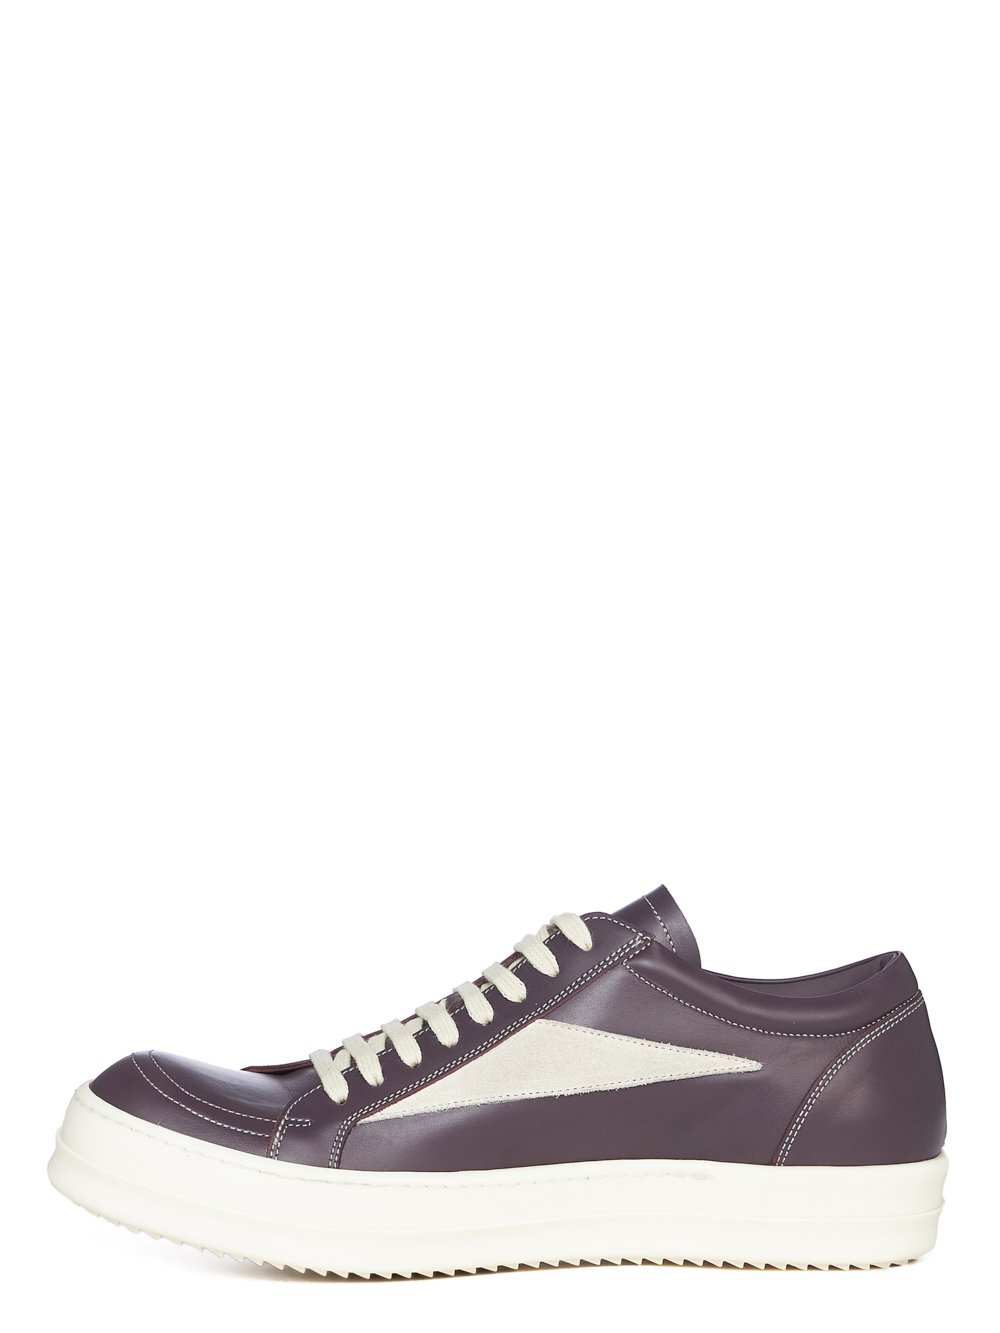 RICK OWENS FW23 LUXOR VINTAGE SNEAKS IN AMETHYST AND MILK CORTINA GREASE CALF LEATHER AND VELOURS SUEDE